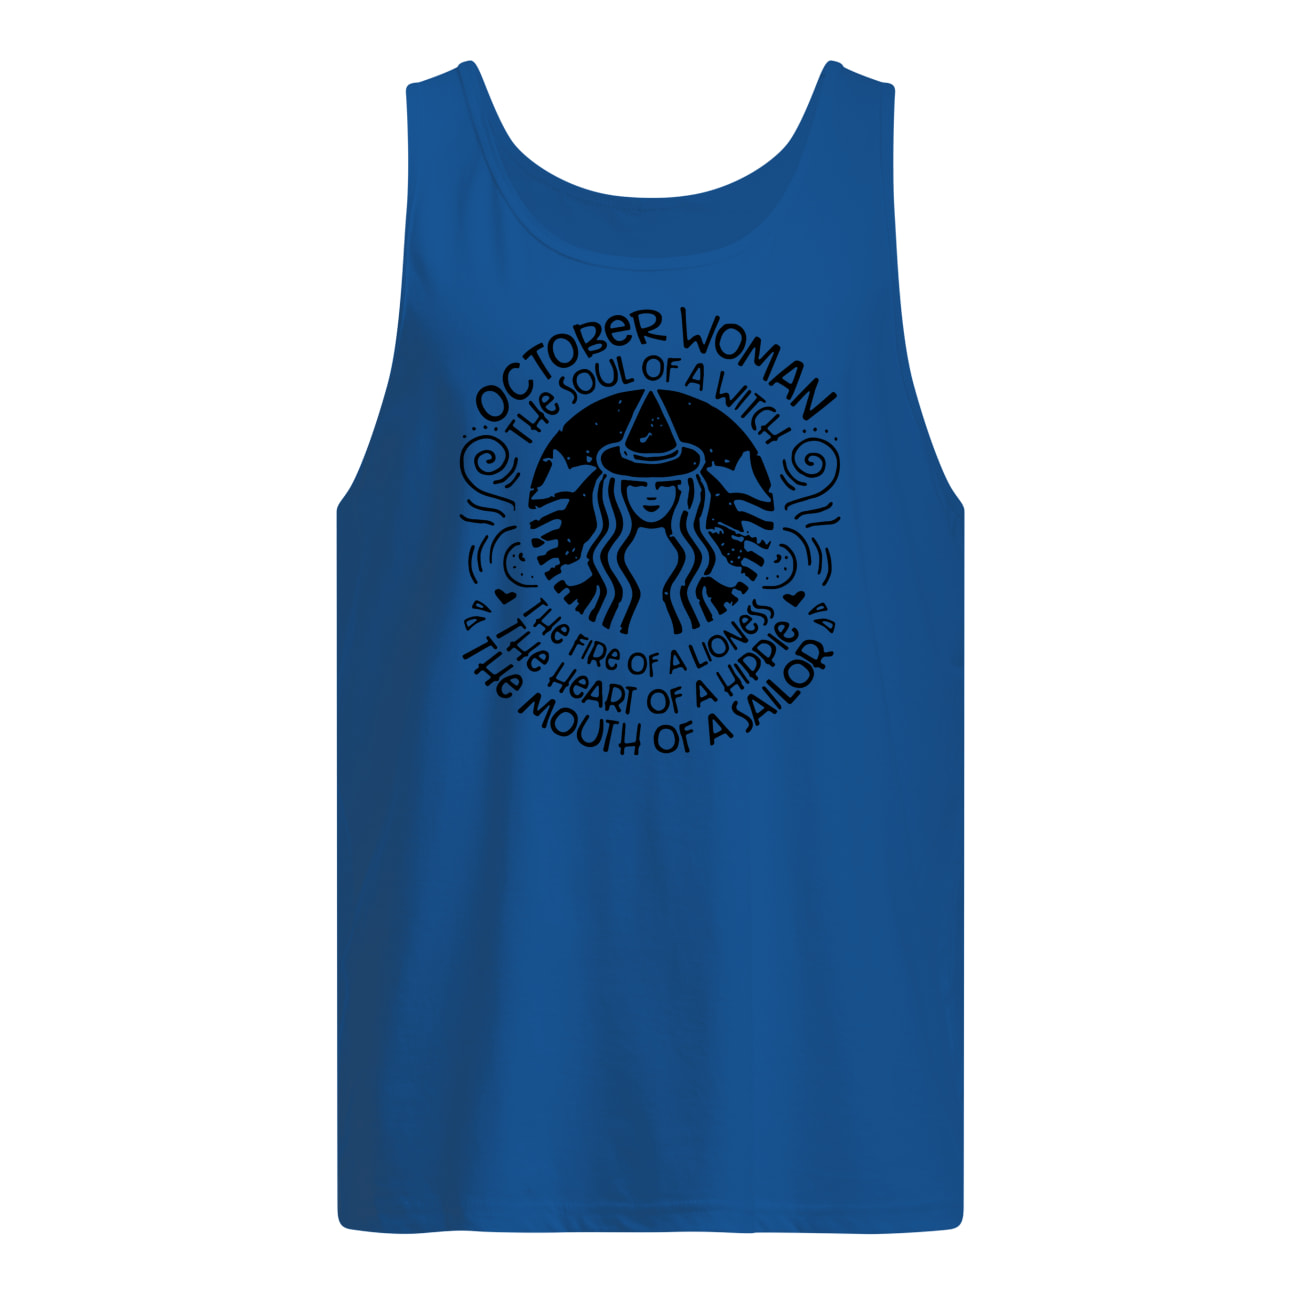 Mermaid october woman the soul of a witch the fire of a lioness tank top